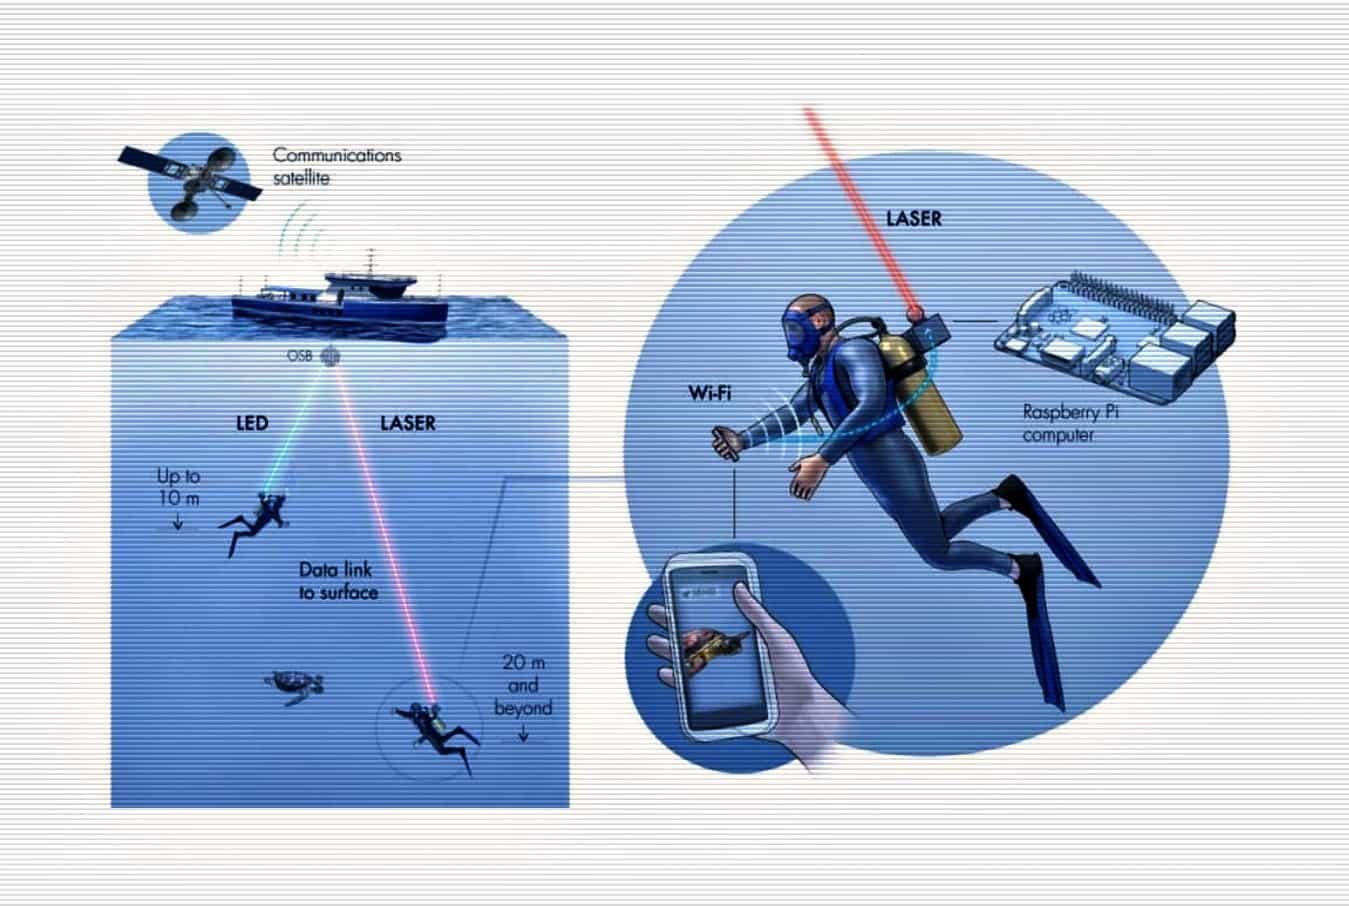 Aqua-Fi - New optical networks can deliver Internet underwater